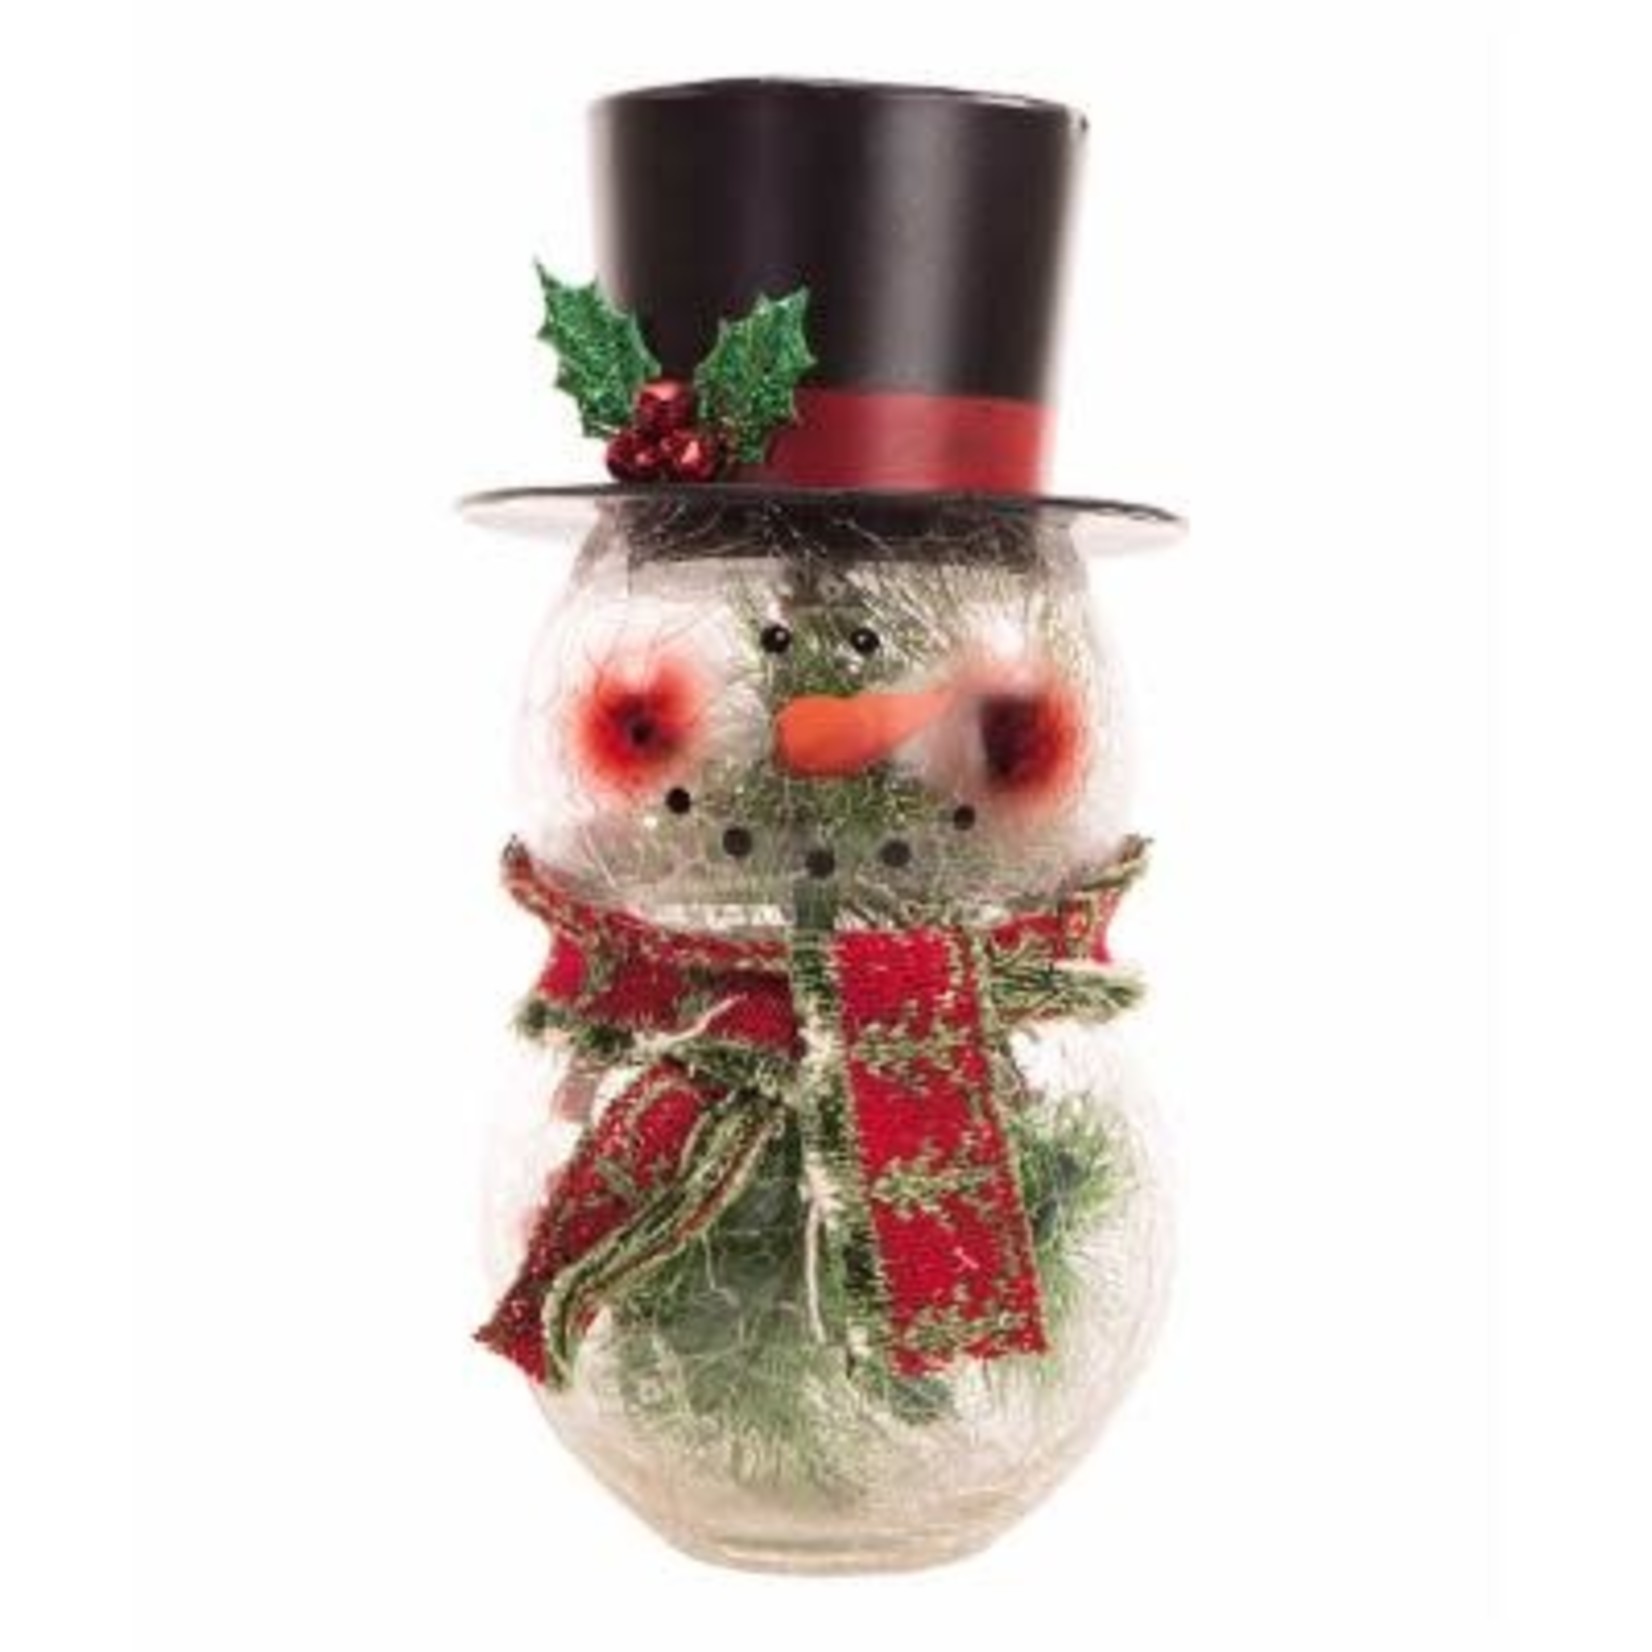 Lighted crackled glass snowman